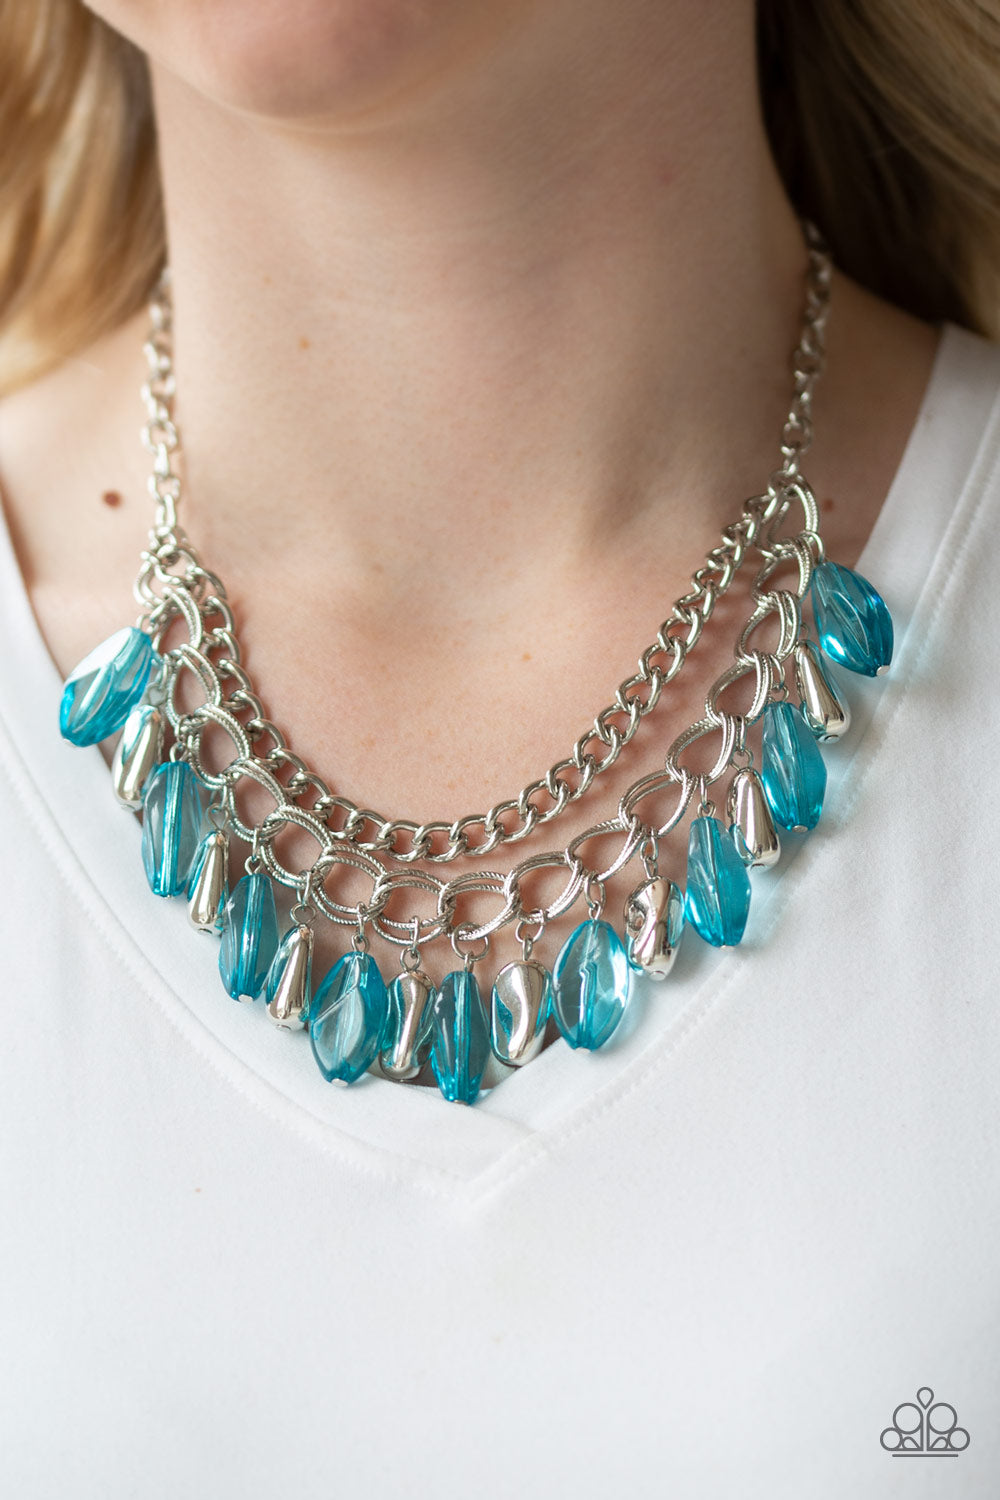 Paparazzi Accessories - Spring Daydream - Blue & Silver Necklace